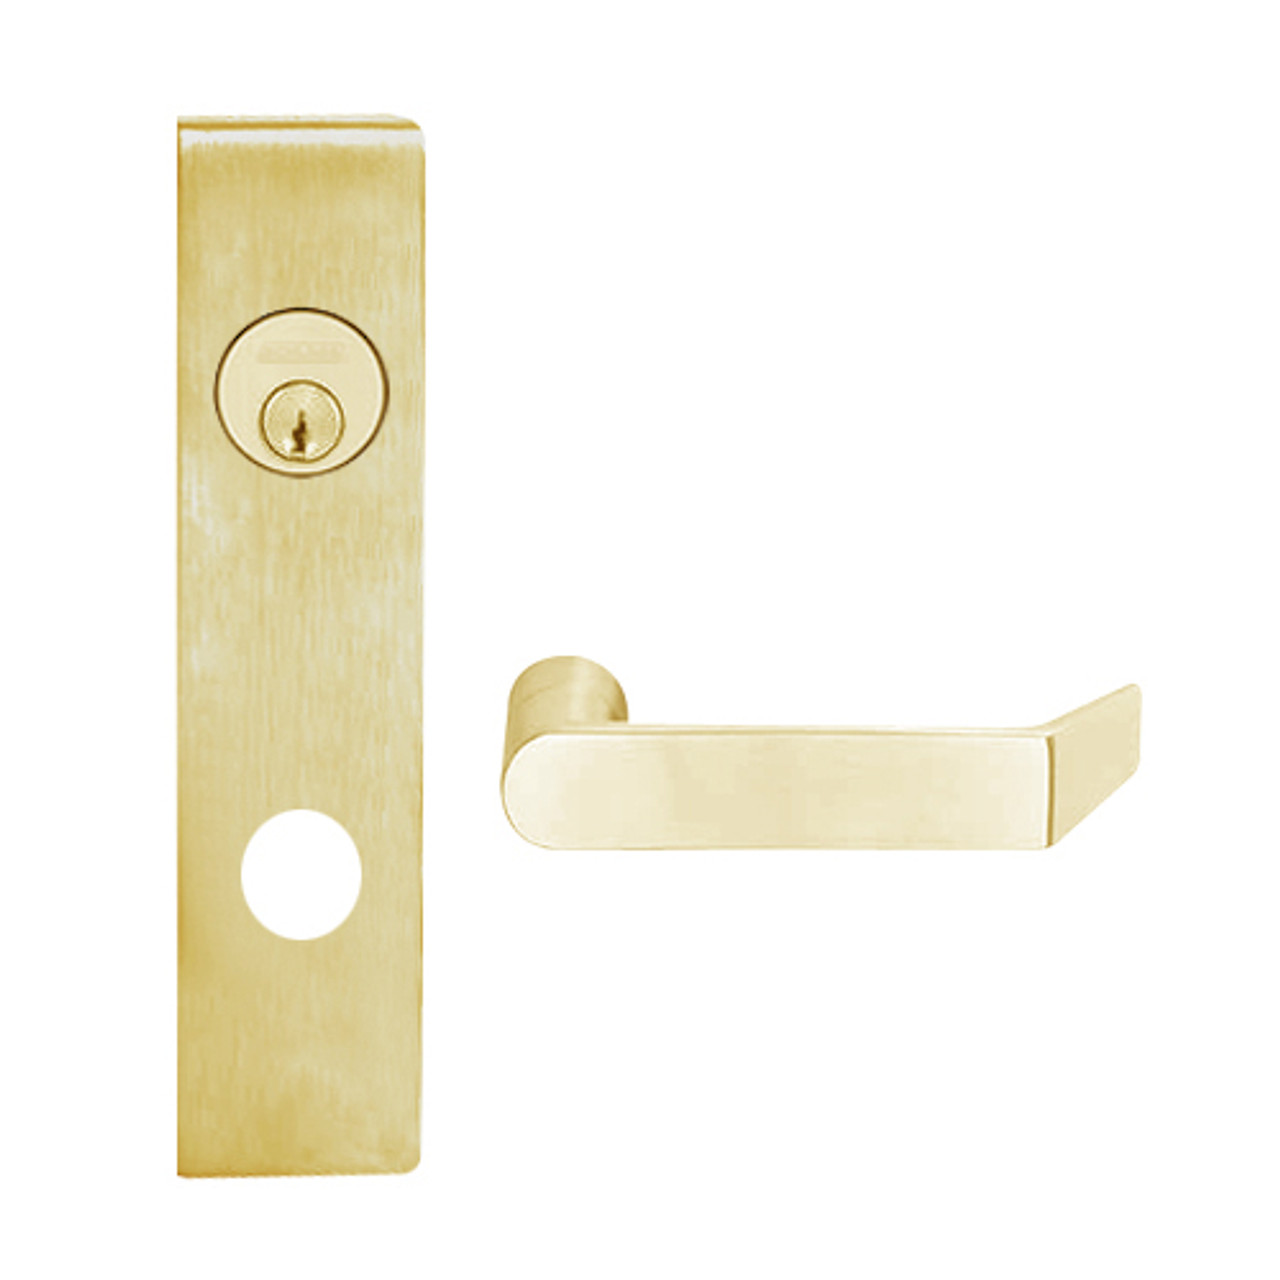 L9456L-06L-606 Schlage L Series Less Cylinder Corridor with Deadbolt Commercial Mortise Lock with 06 Cast Lever Design in Satin Brass